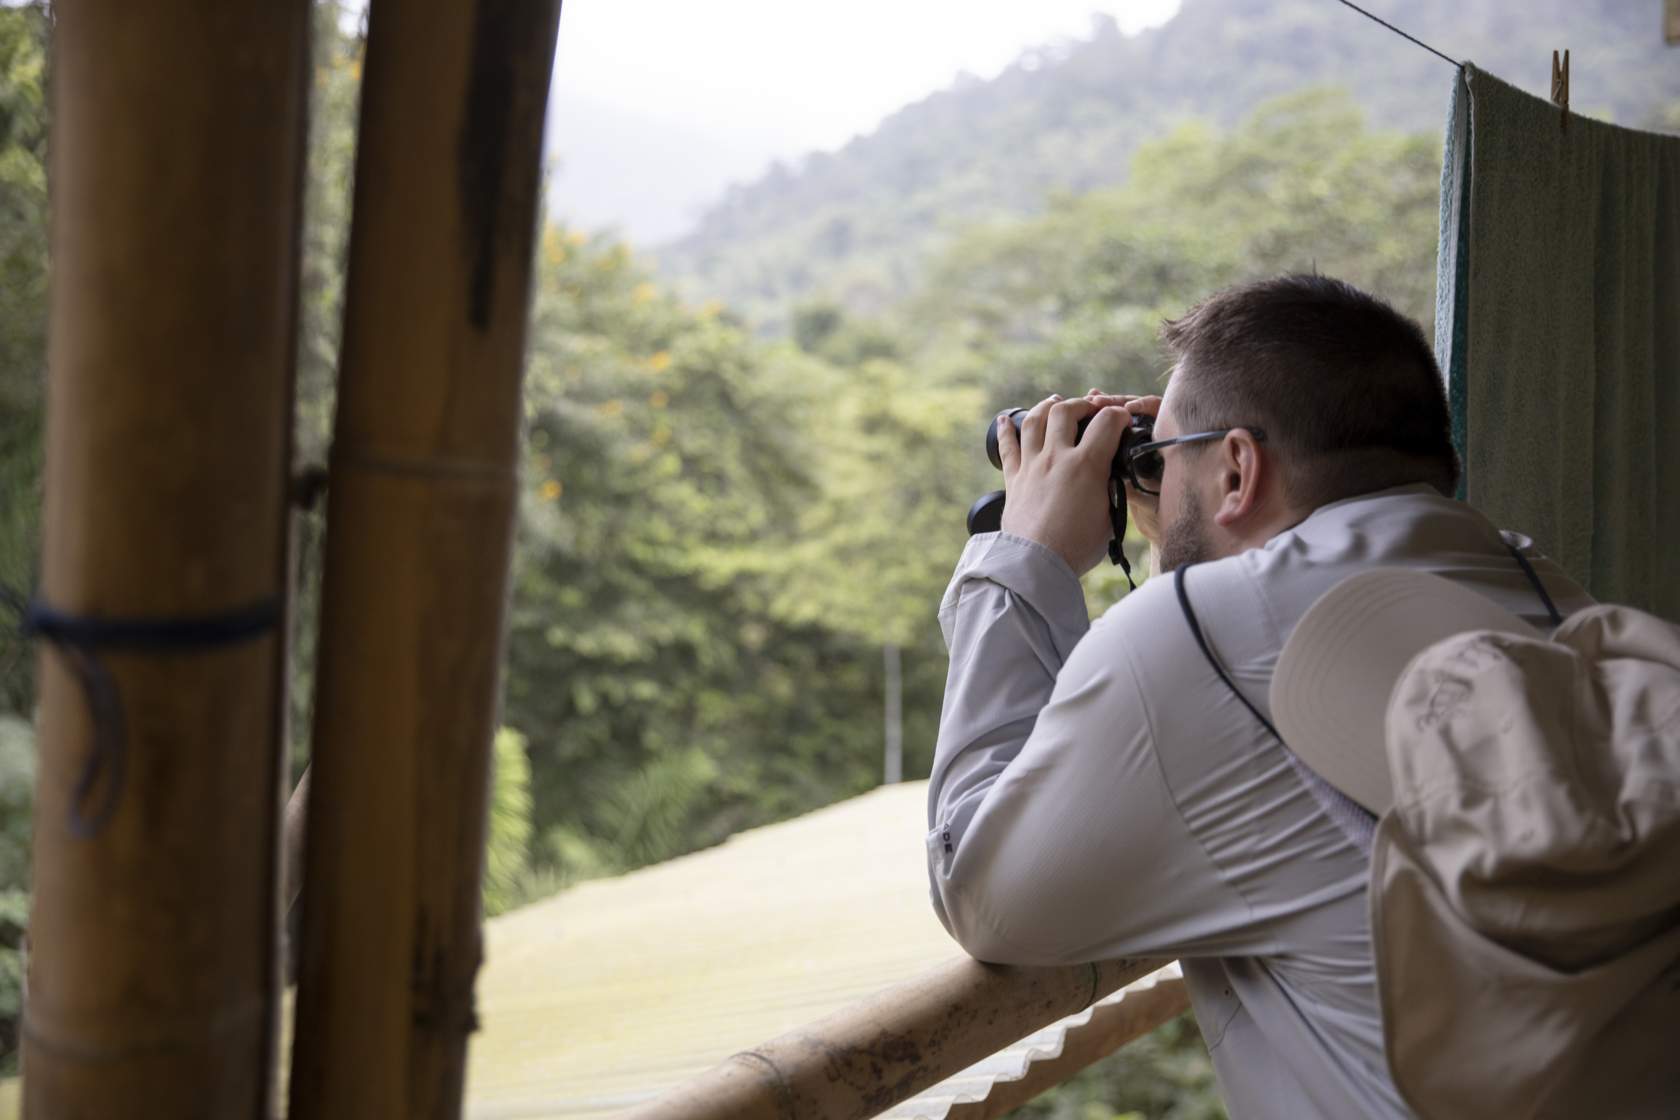 Austin Banks uses binoculars to look for birds in the rainforest